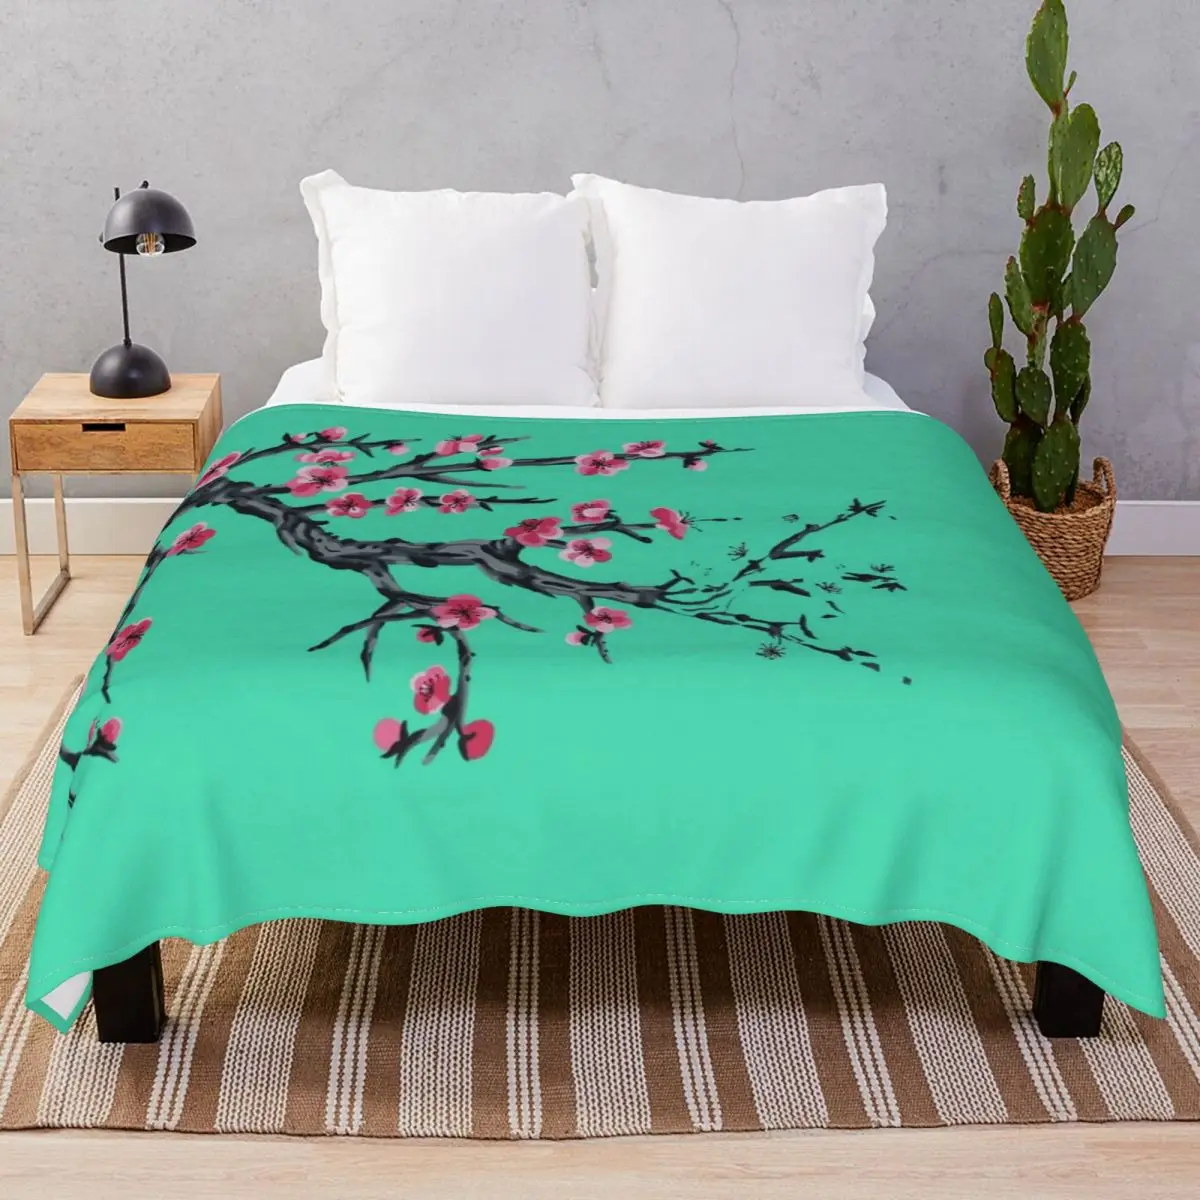 Arizona Green Tea Blankets Fleece Decoration Soft Throw Blanket for Bedding Home Couch Travel Office